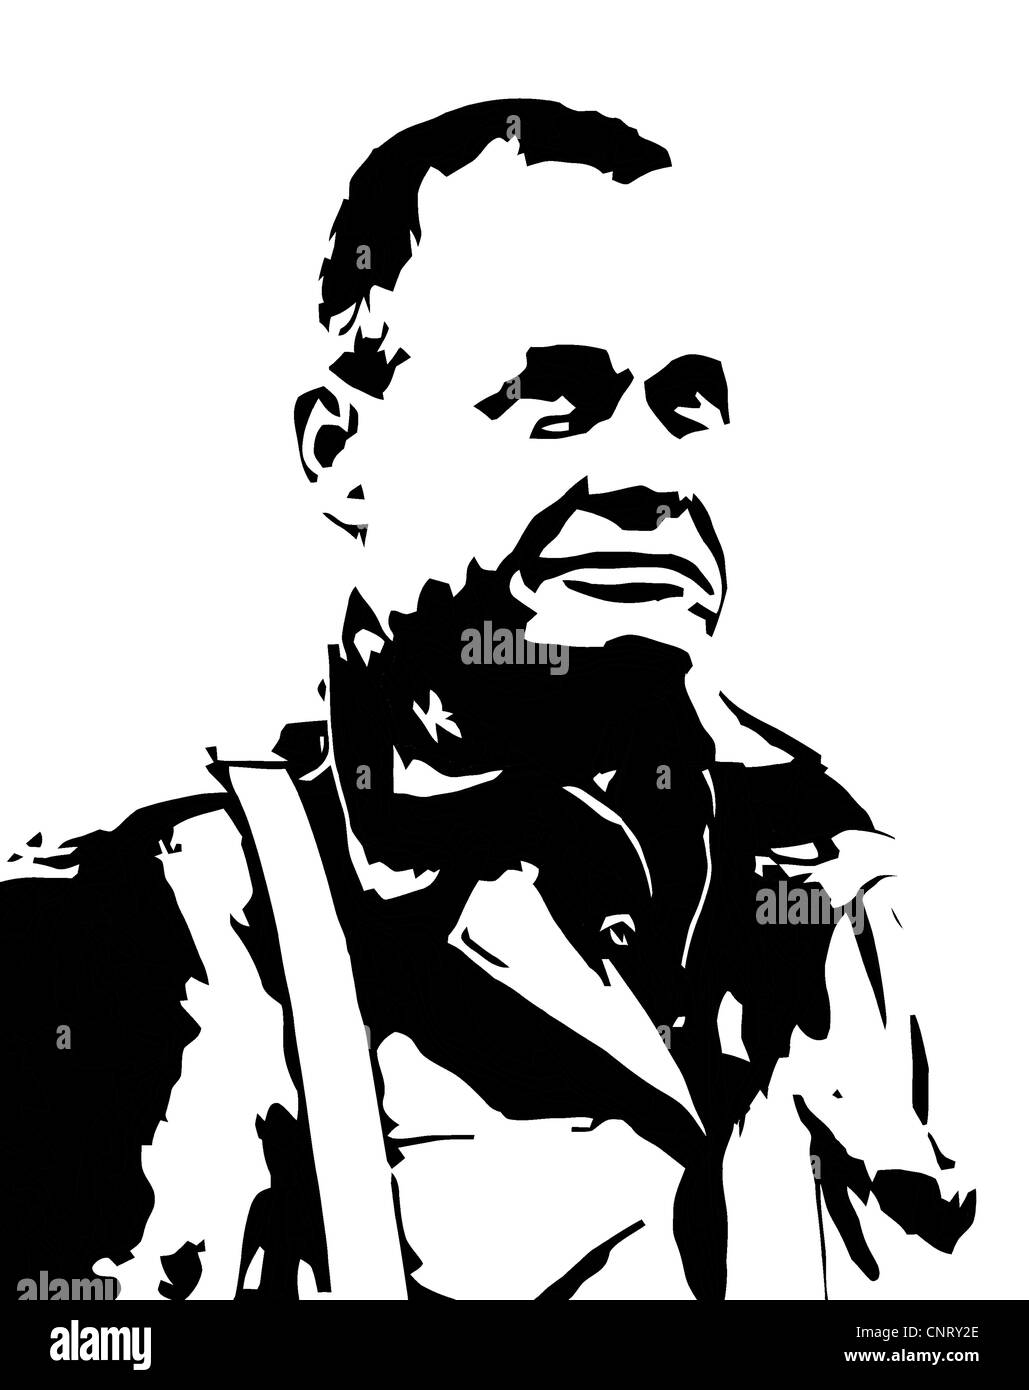 Vector illustration of General Lewis Chesty Puller. Stock Photo